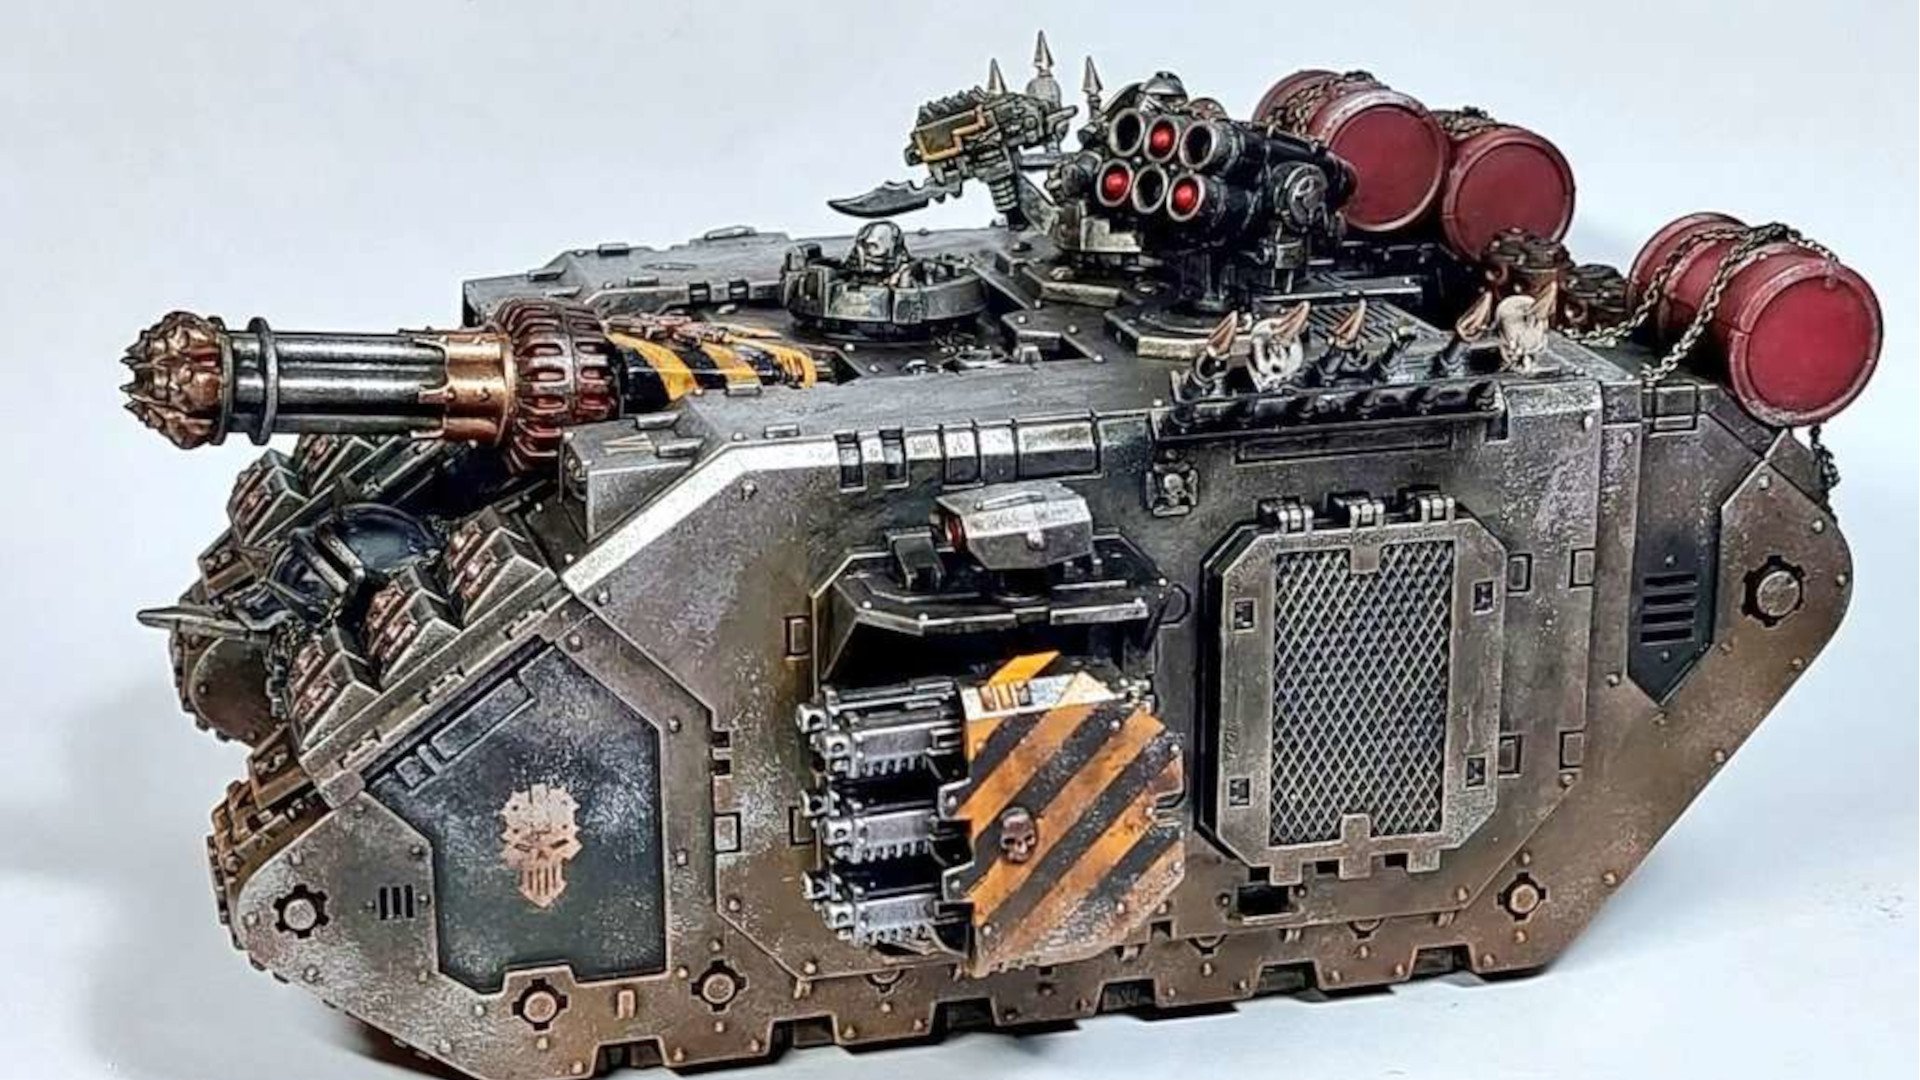 Iron Warriors land raider tank conversion by 40k Steve - an armoured assault vehicle, with additional guns and stowage